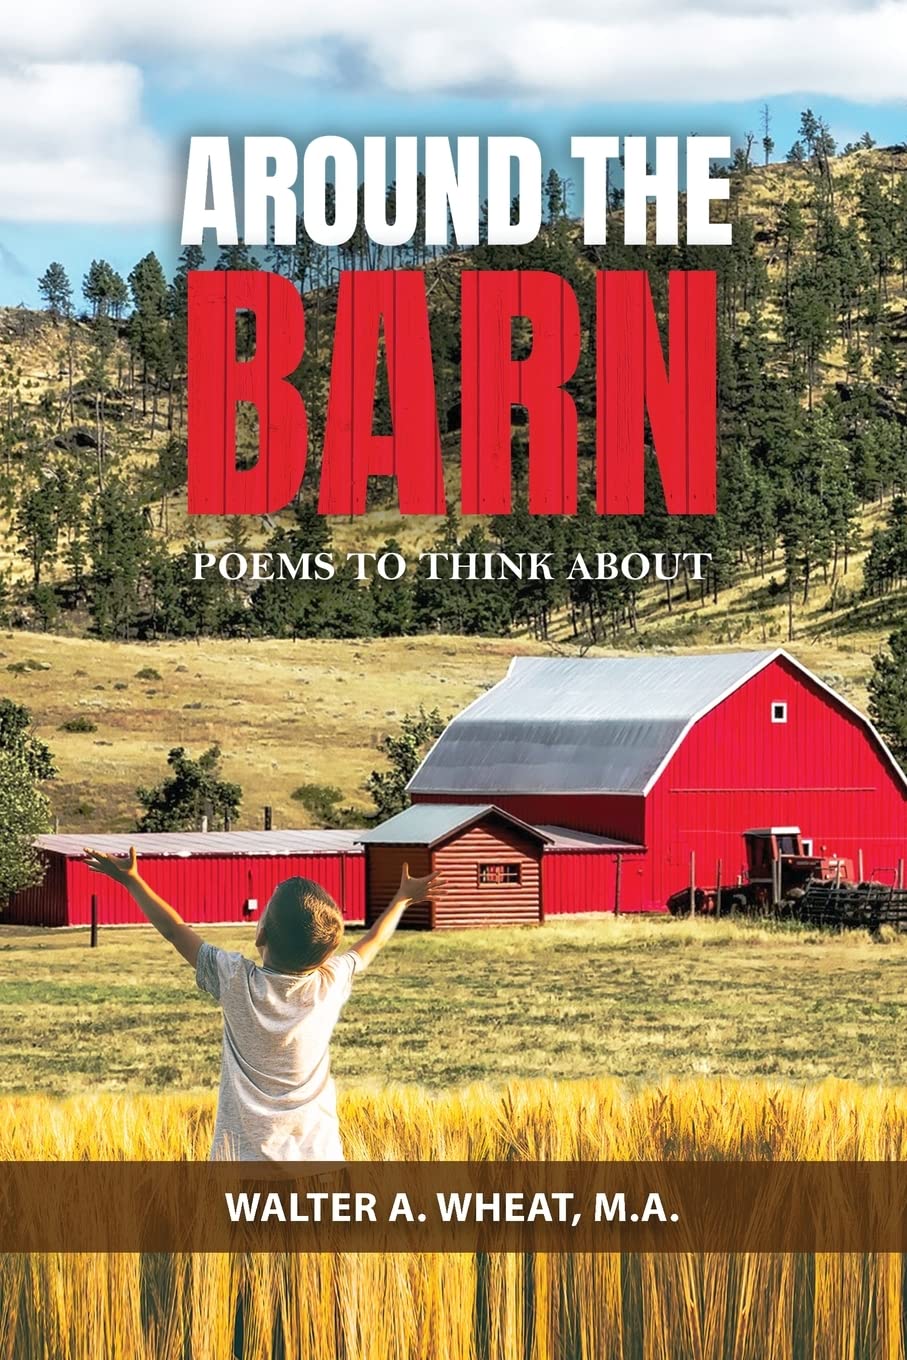 Walter A. Wheat launches new book, Around the Barn, Poems to Think About; published by Author’s Tranquility Press